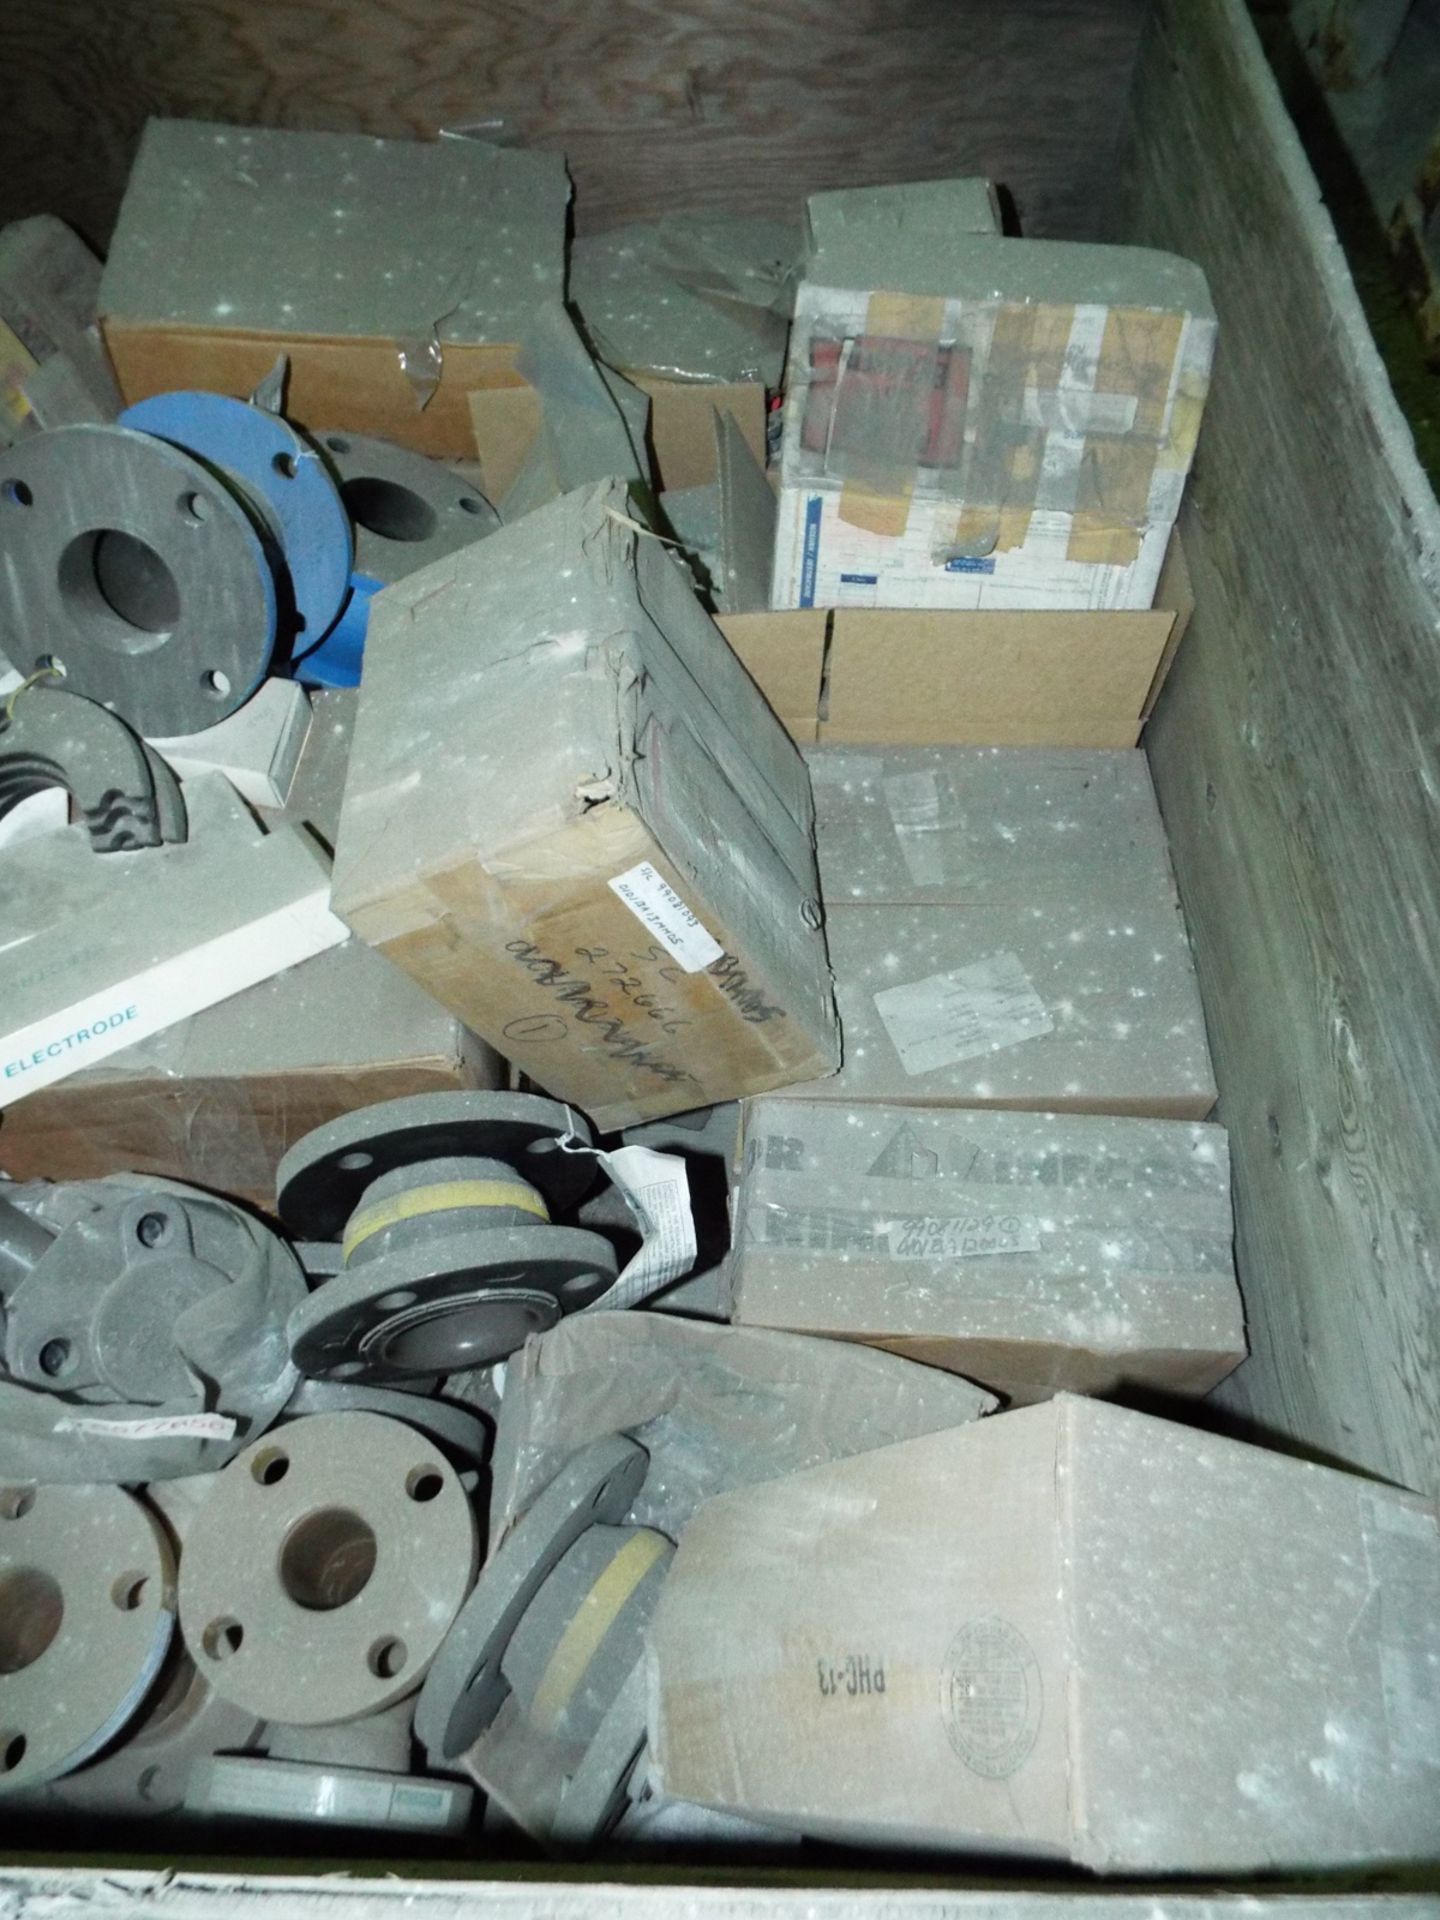 LOT/ CONTENTS OF CRATE INCLUDING BUT NOT LIMITED TO (2) 1HP, 1700RPM, 230/460V ELECTRIC MOTORS; ( - Image 3 of 3